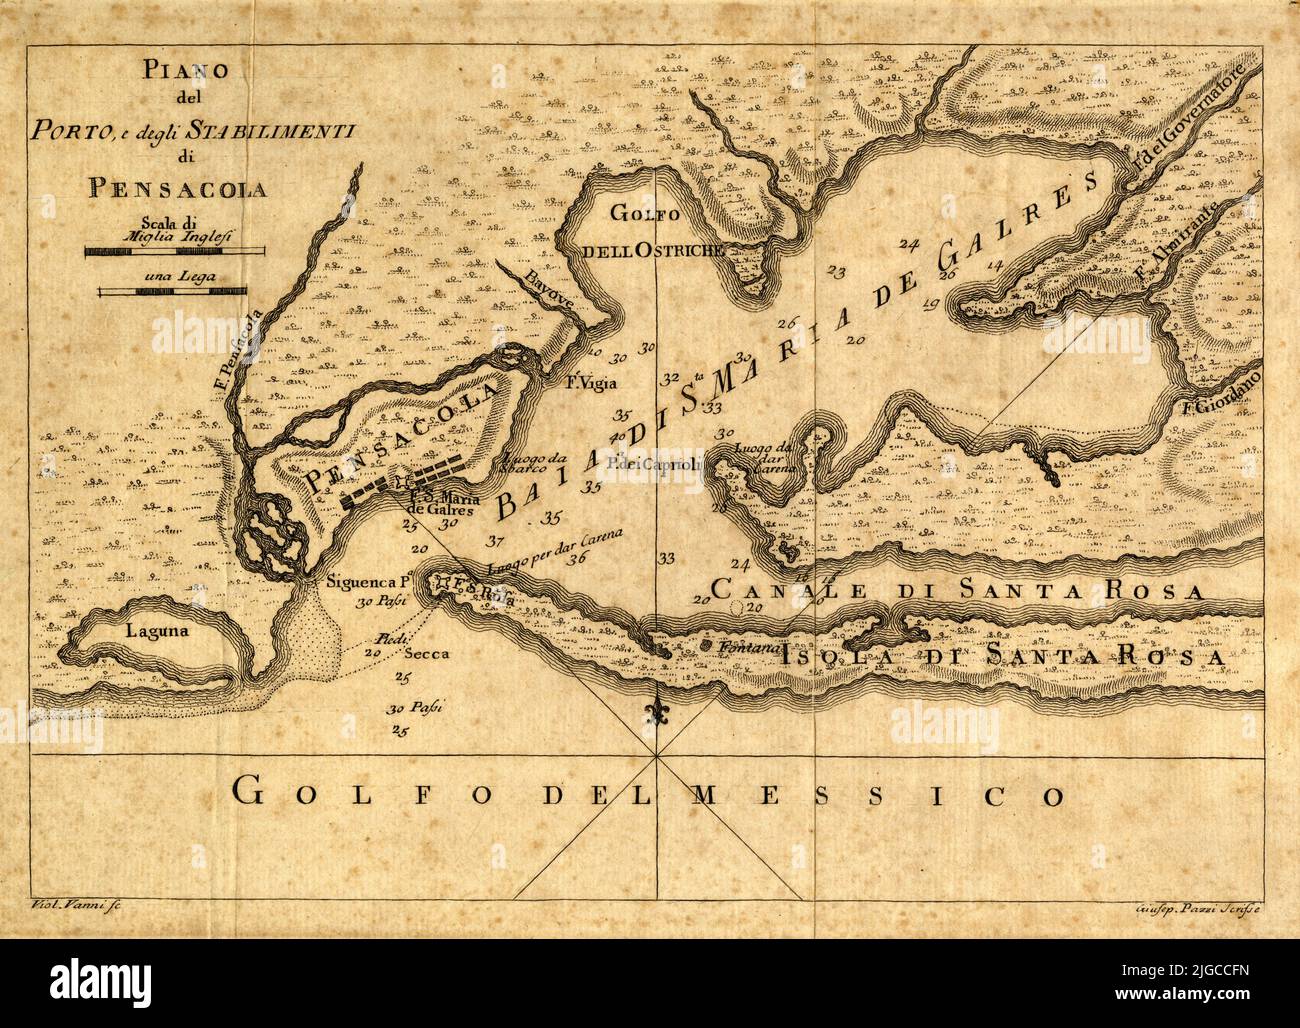 Map of the Port and Settlement of Pensacola, 1763, by Violante Vanni. Italian language Stock Photo